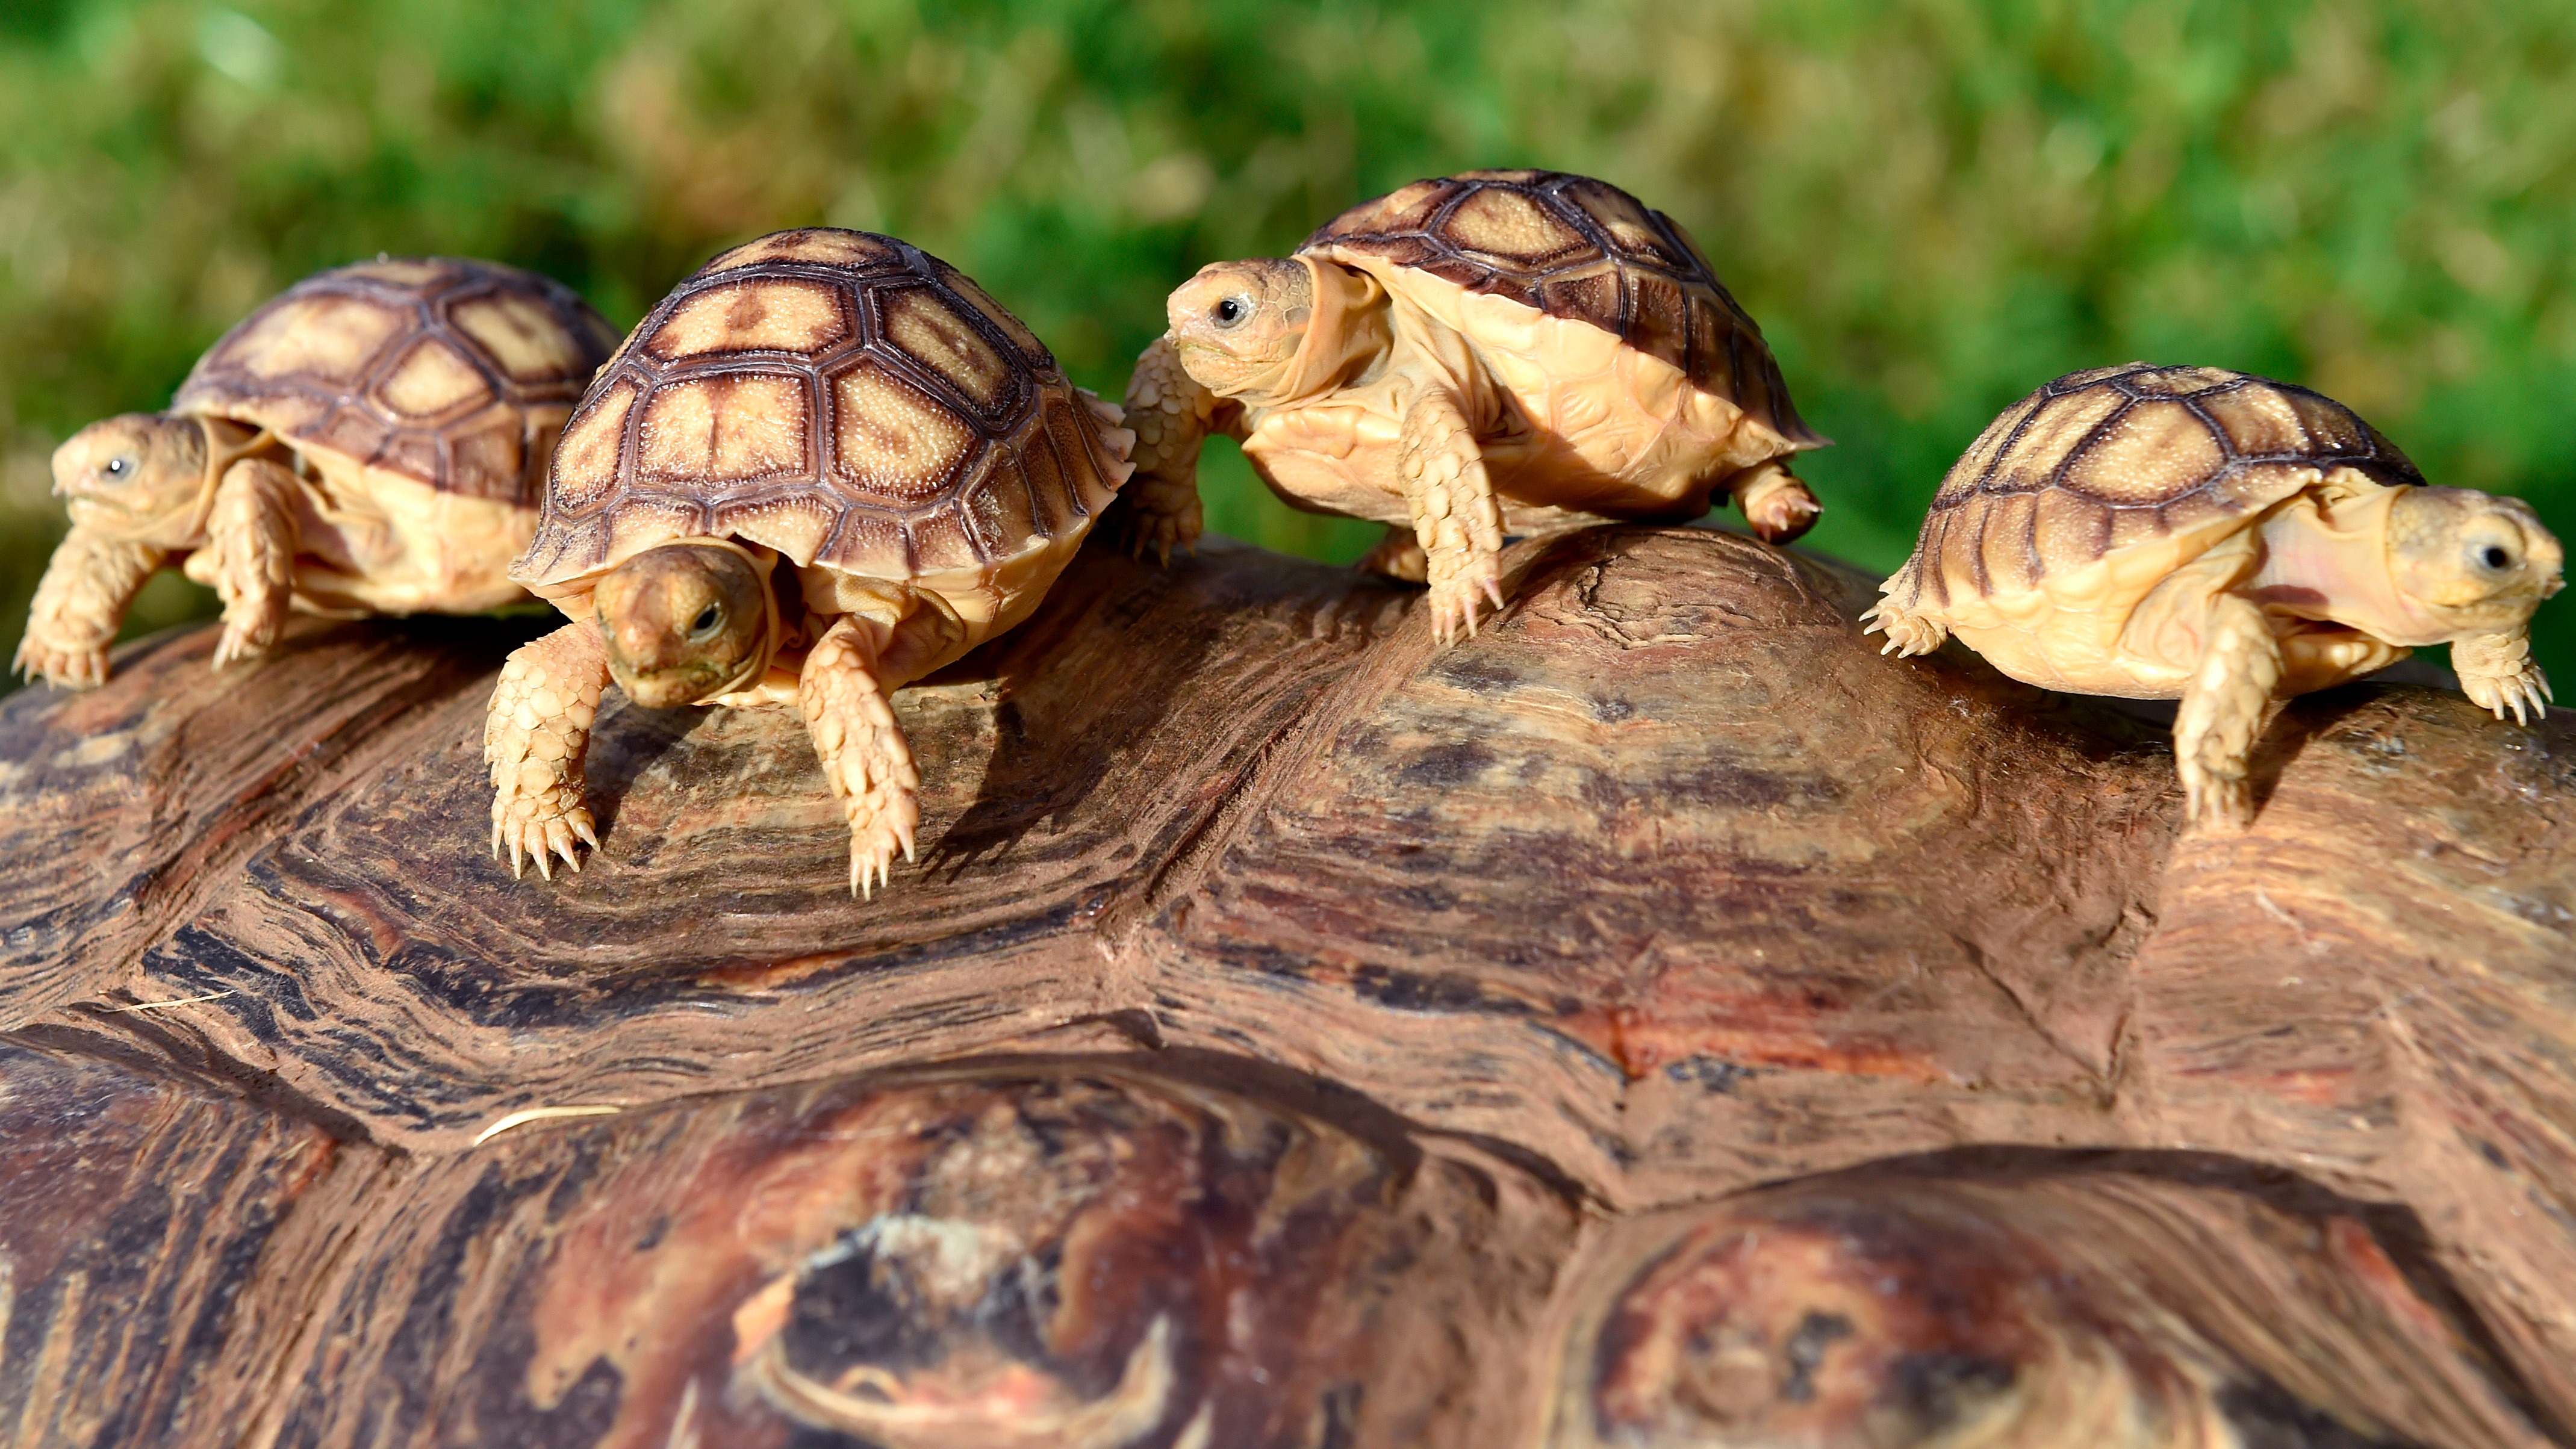 Why is a group of tortoises called a creep?